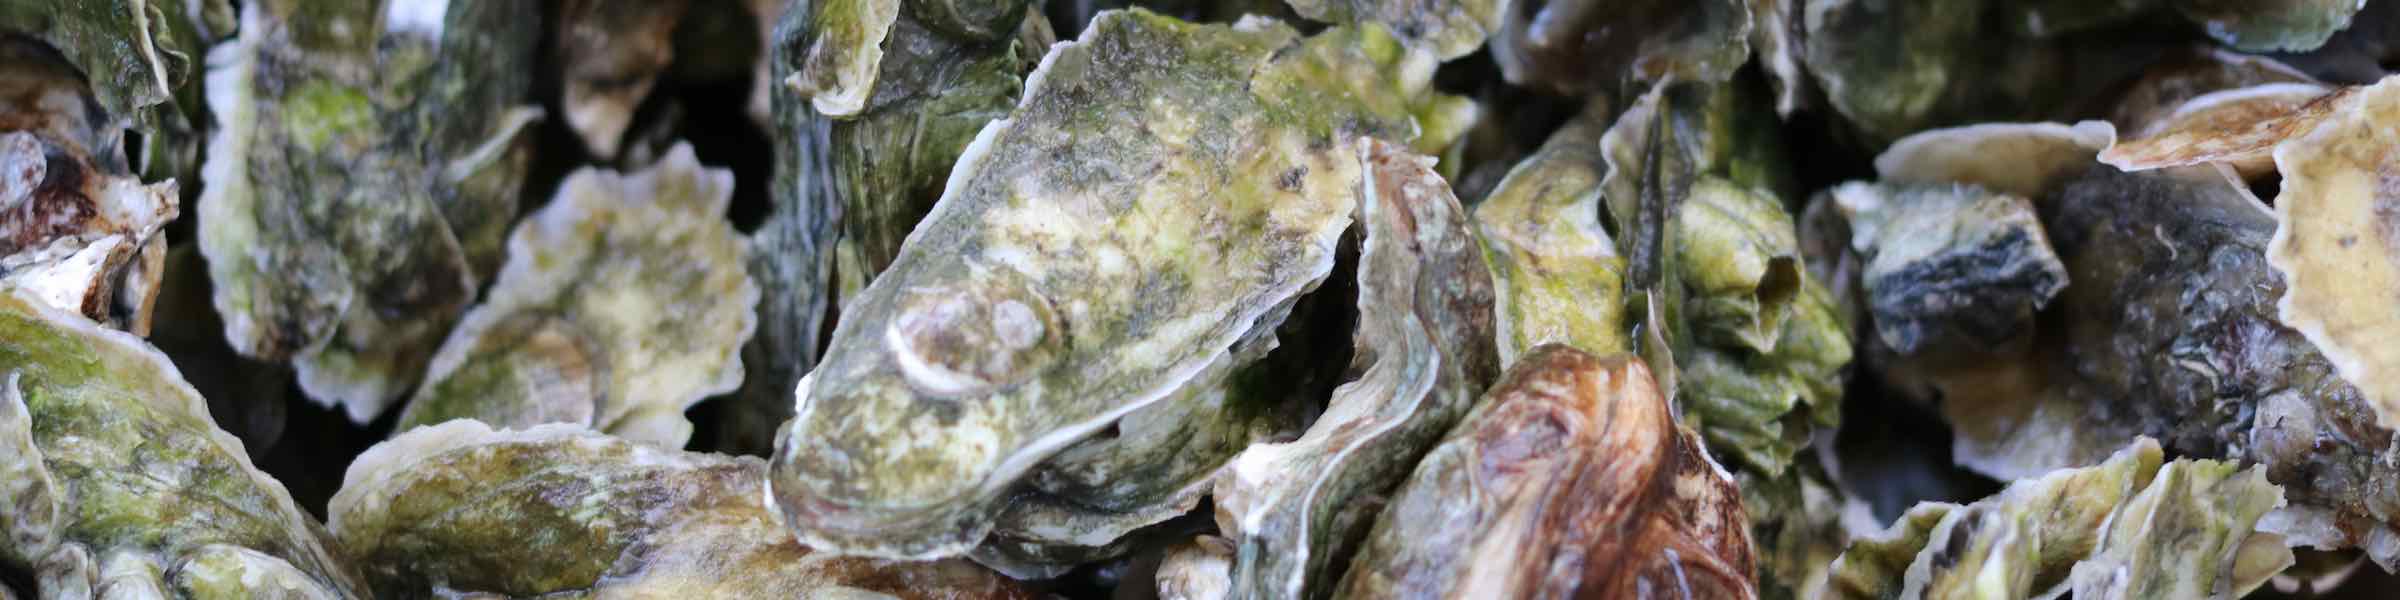 Close up view of raw oysters in their shells.